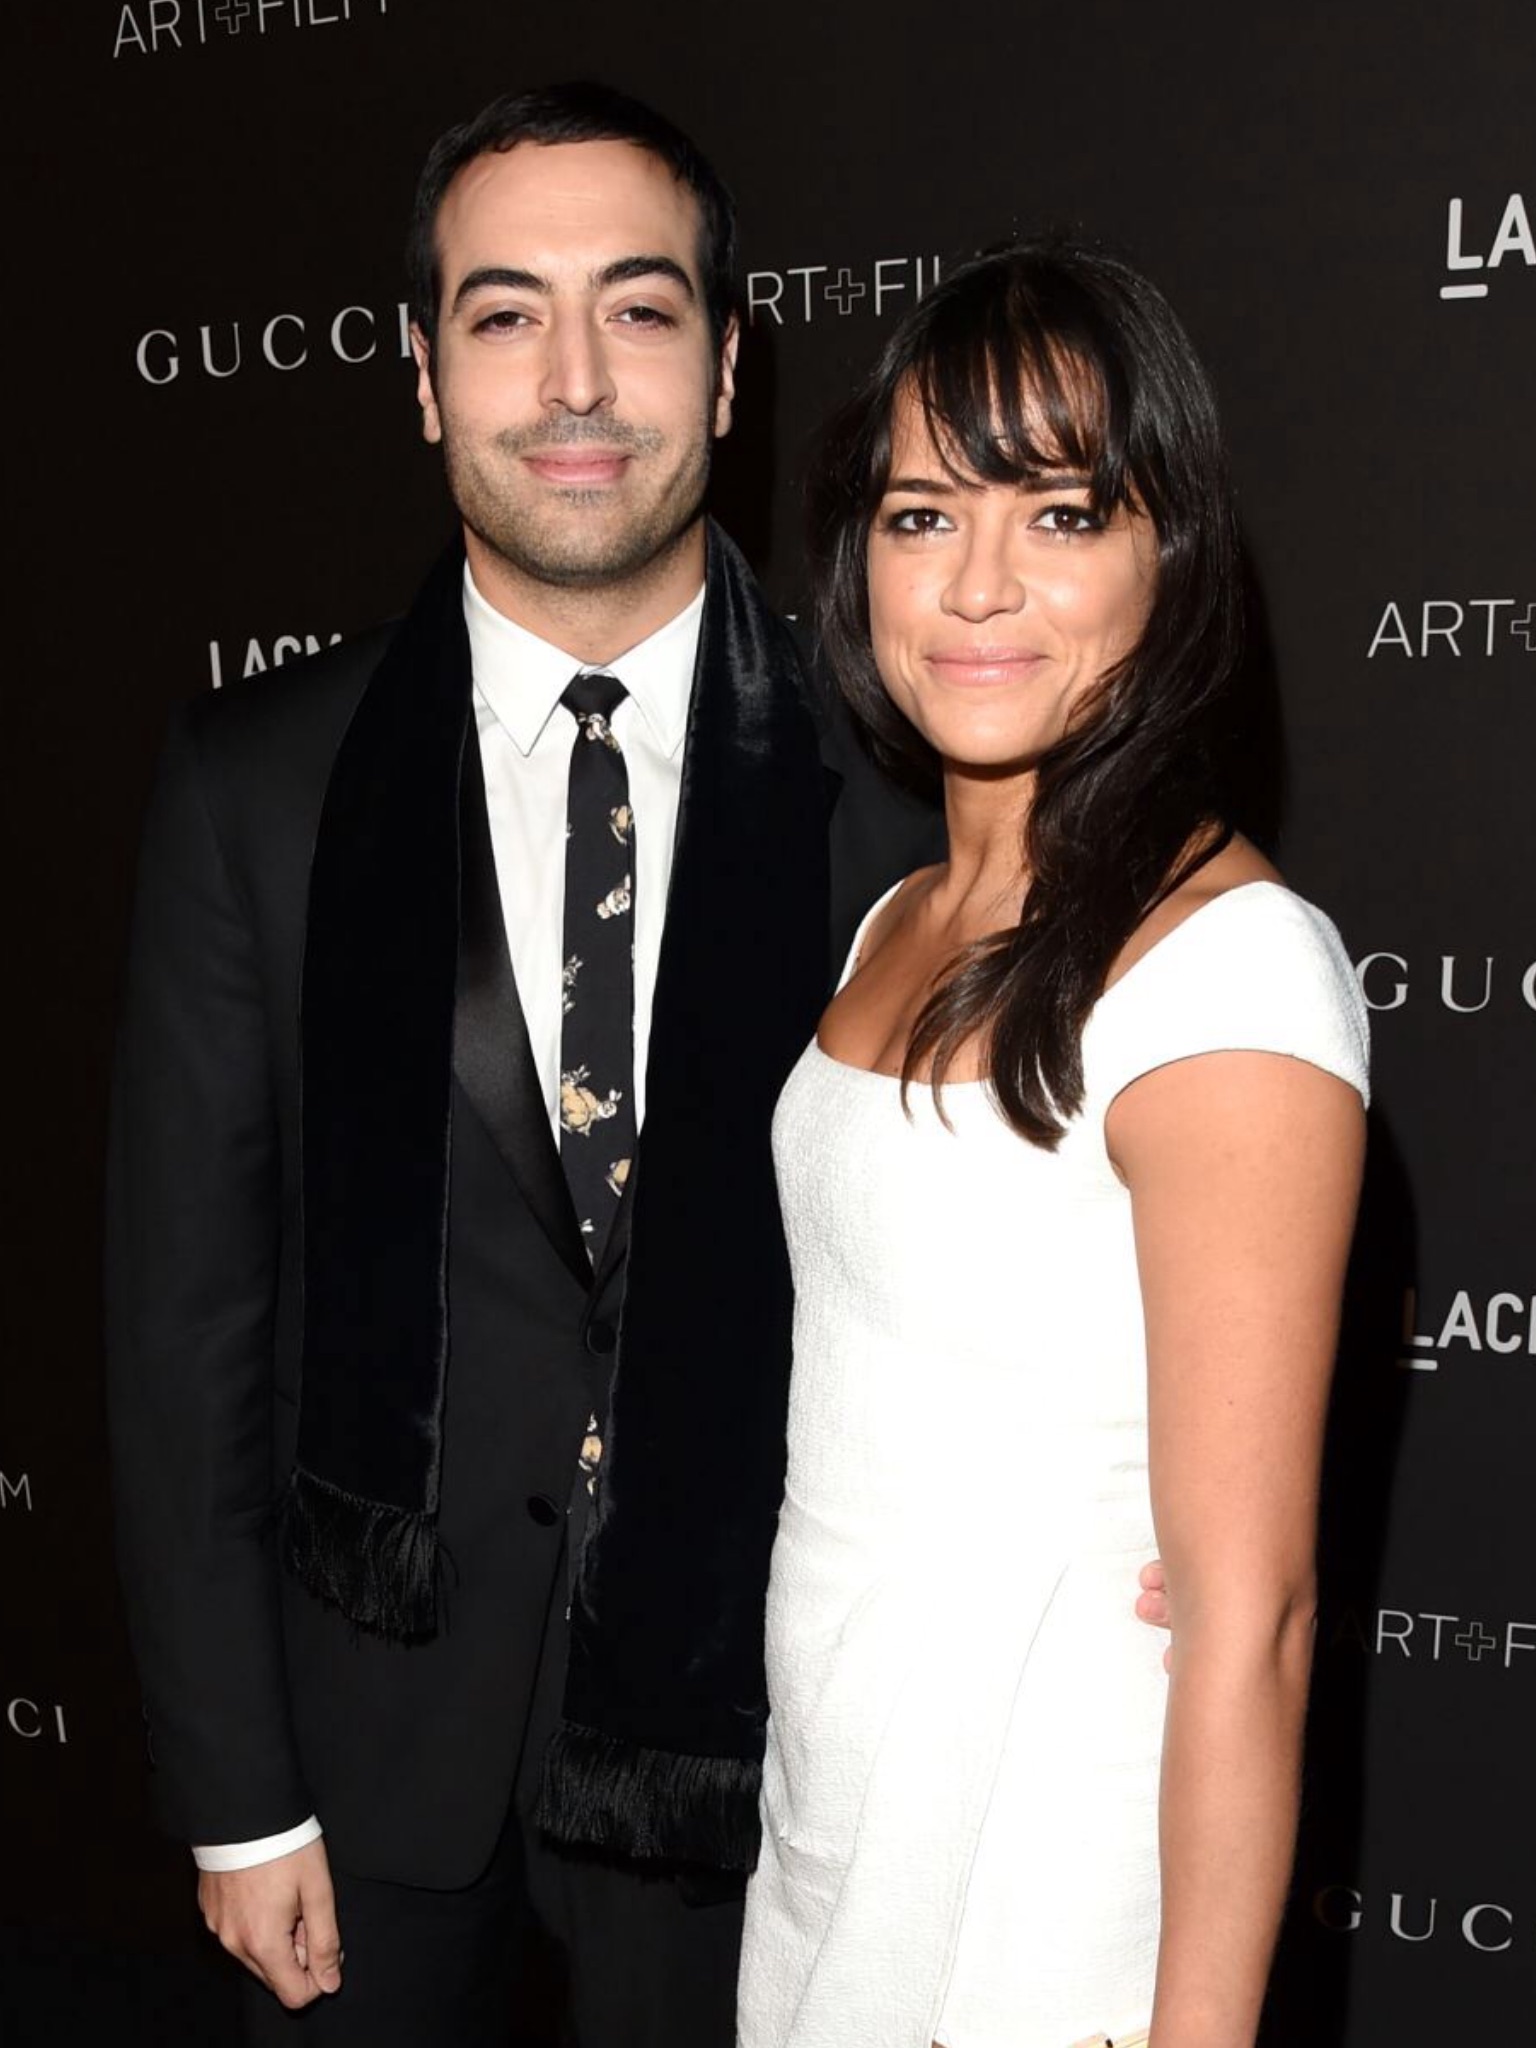 Producer Mohammed Al Turki and actress Michelle Rodriguez attend the 2014 LACMA Art + Film Gala honoring Barbara Kruger and Quentin Tarantino presented by Gucci at LACMA on November 1, 2014 in Los Angeles, California. CREDIT: JASON MERRITT